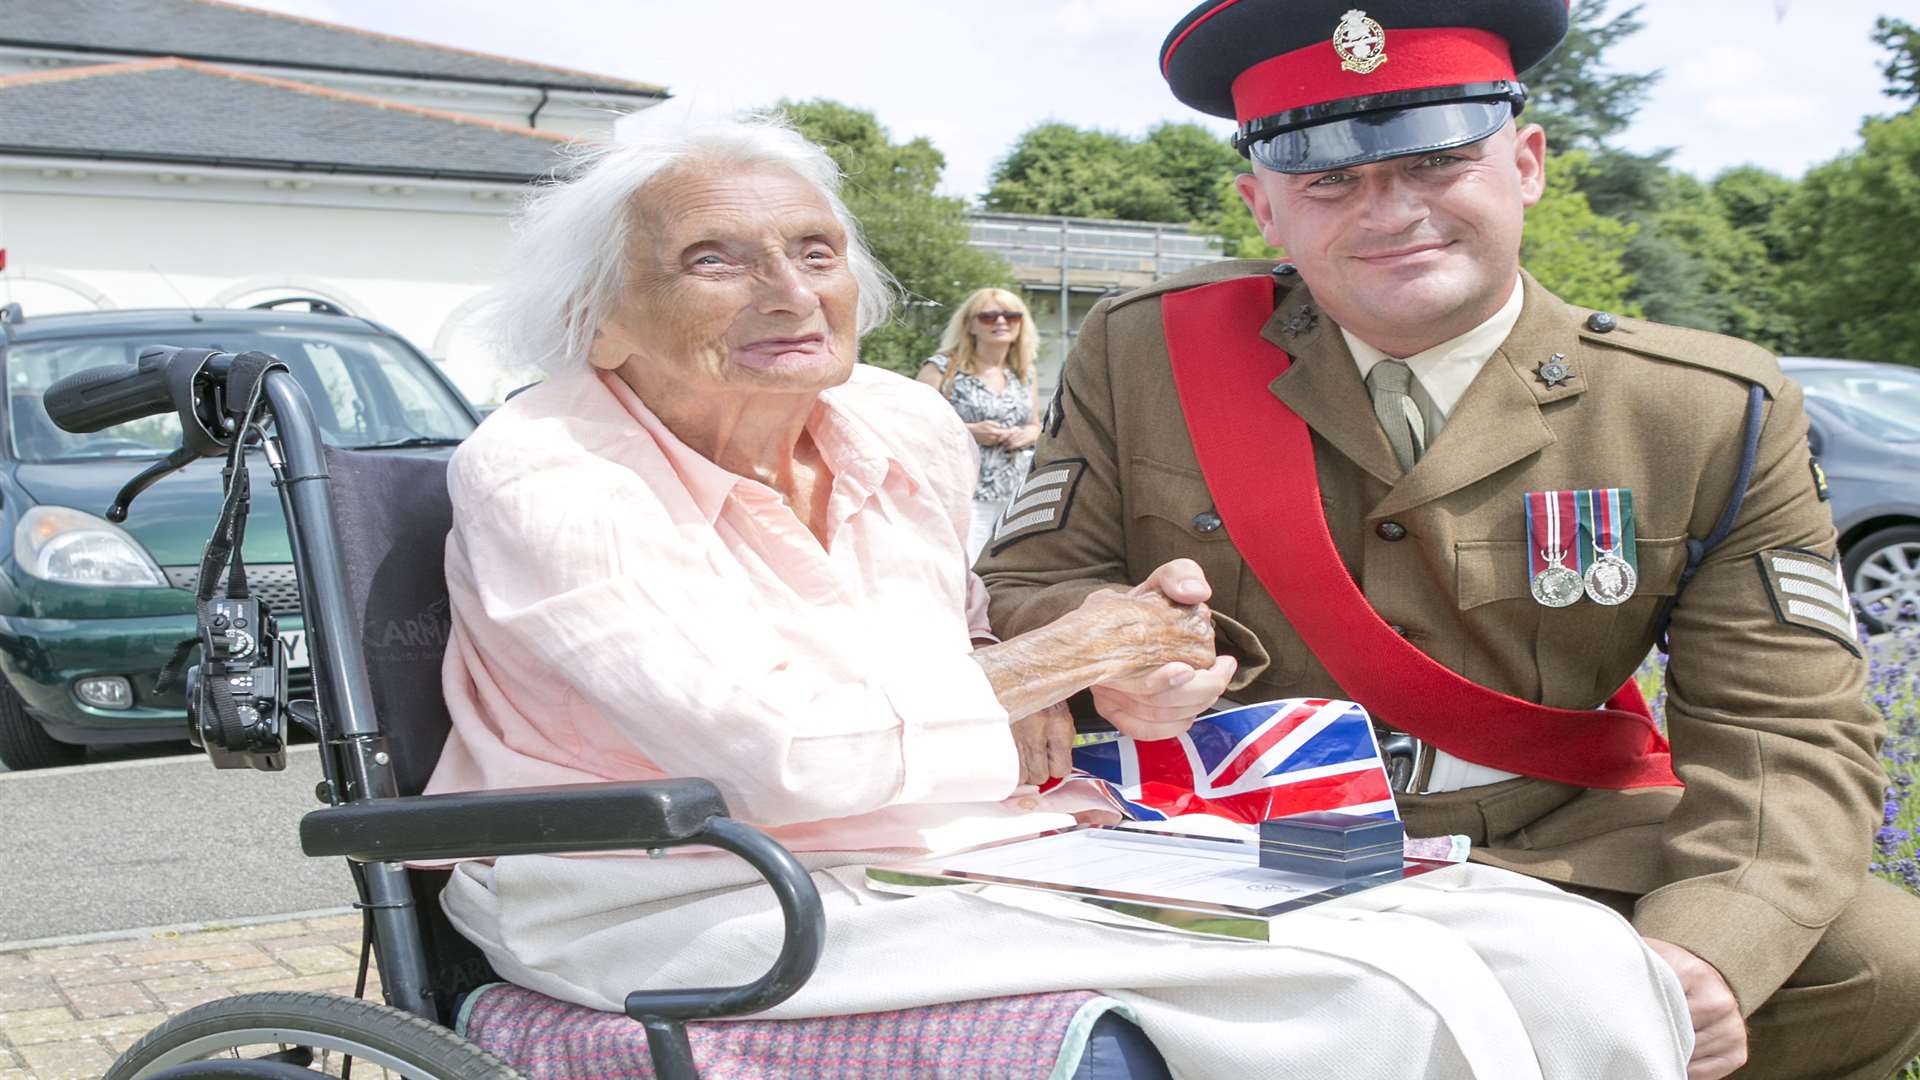 Mary Smith, 95 who worked at Bletchely Park is recognised for her contribution to HM Armed Forces with representative from the Princess of Wales Regiment, Sgt Rob D Phillips